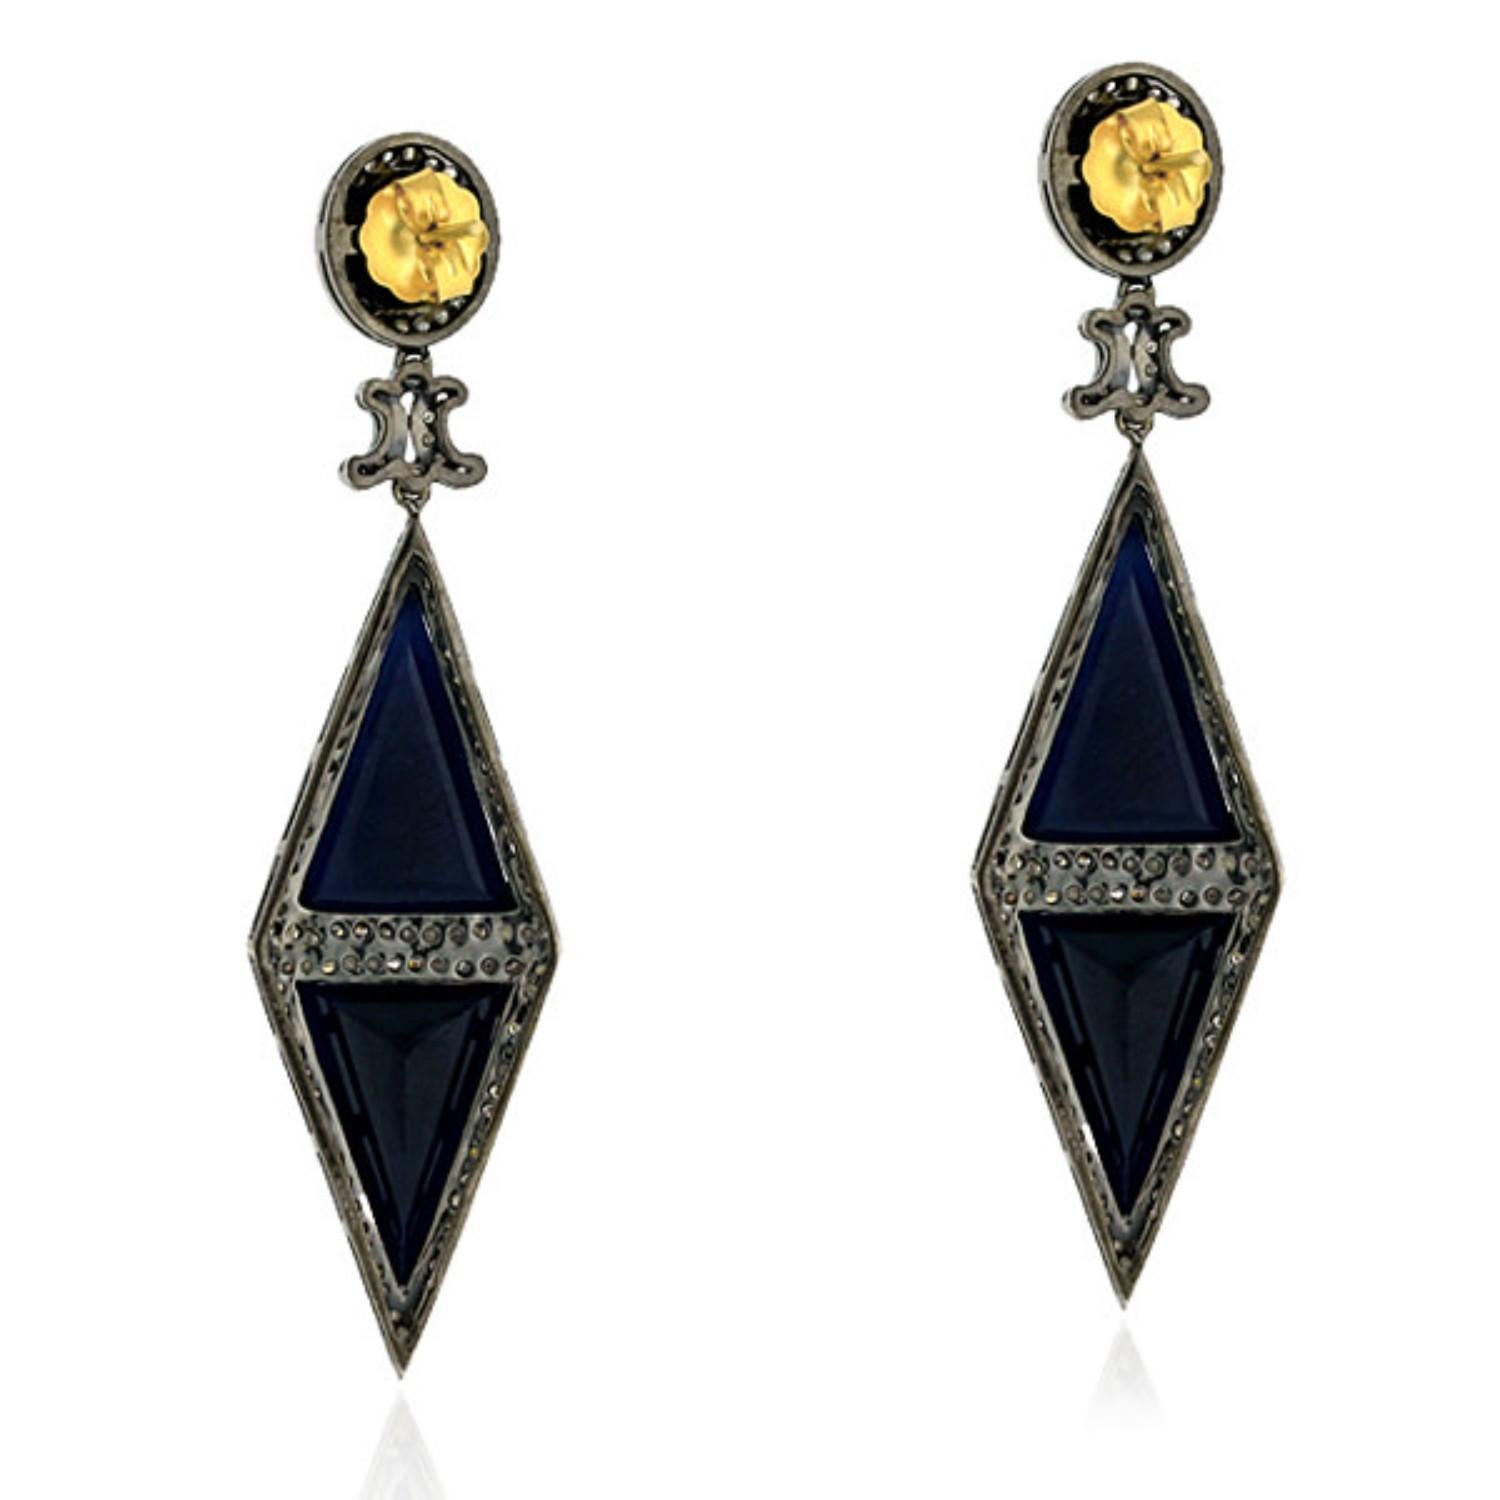 Add some sophistication to your jewelry collection with these Rhombus Shaped Blue Sapphire Earrings. Featuring a beautiful blue sapphire at its center, these earrings are set in a striking combination of 18k gold and silver. Pave diamonds add a